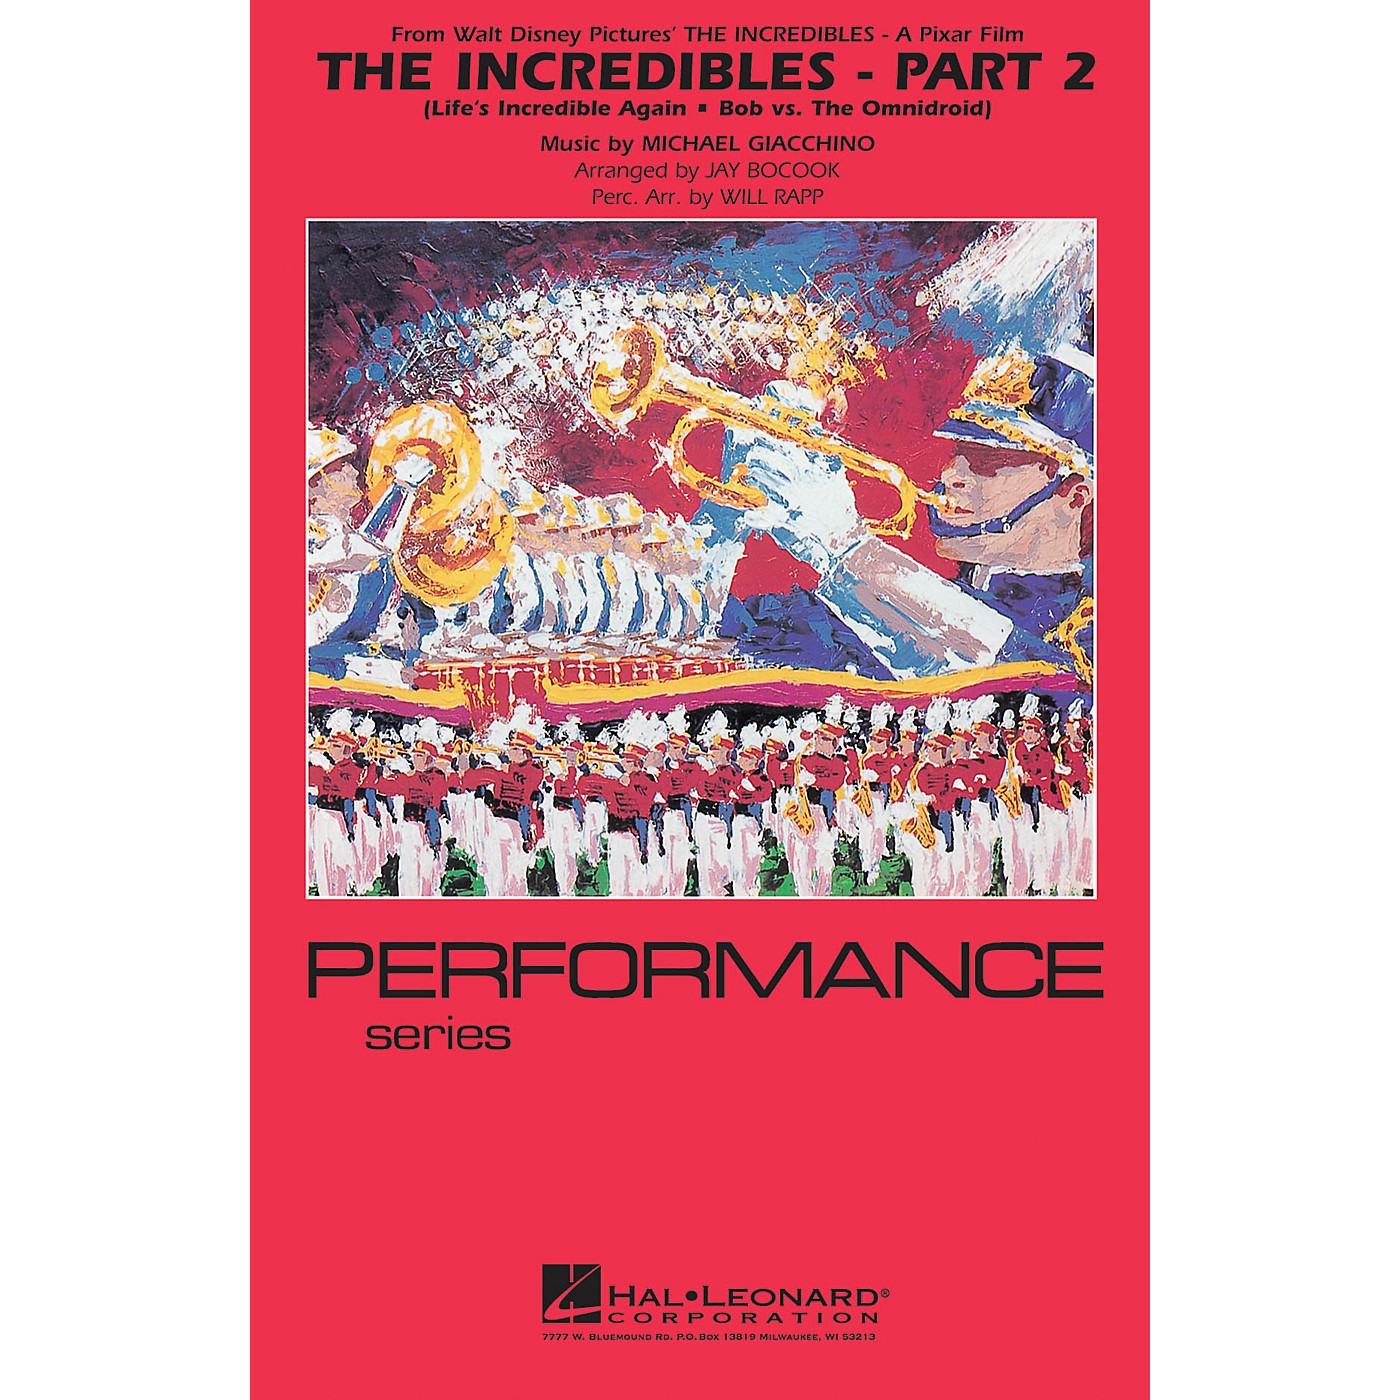 Hal Leonard The Incredibles - Part 2 Marching Band Level 4 Arranged by Jay Bocook thumbnail